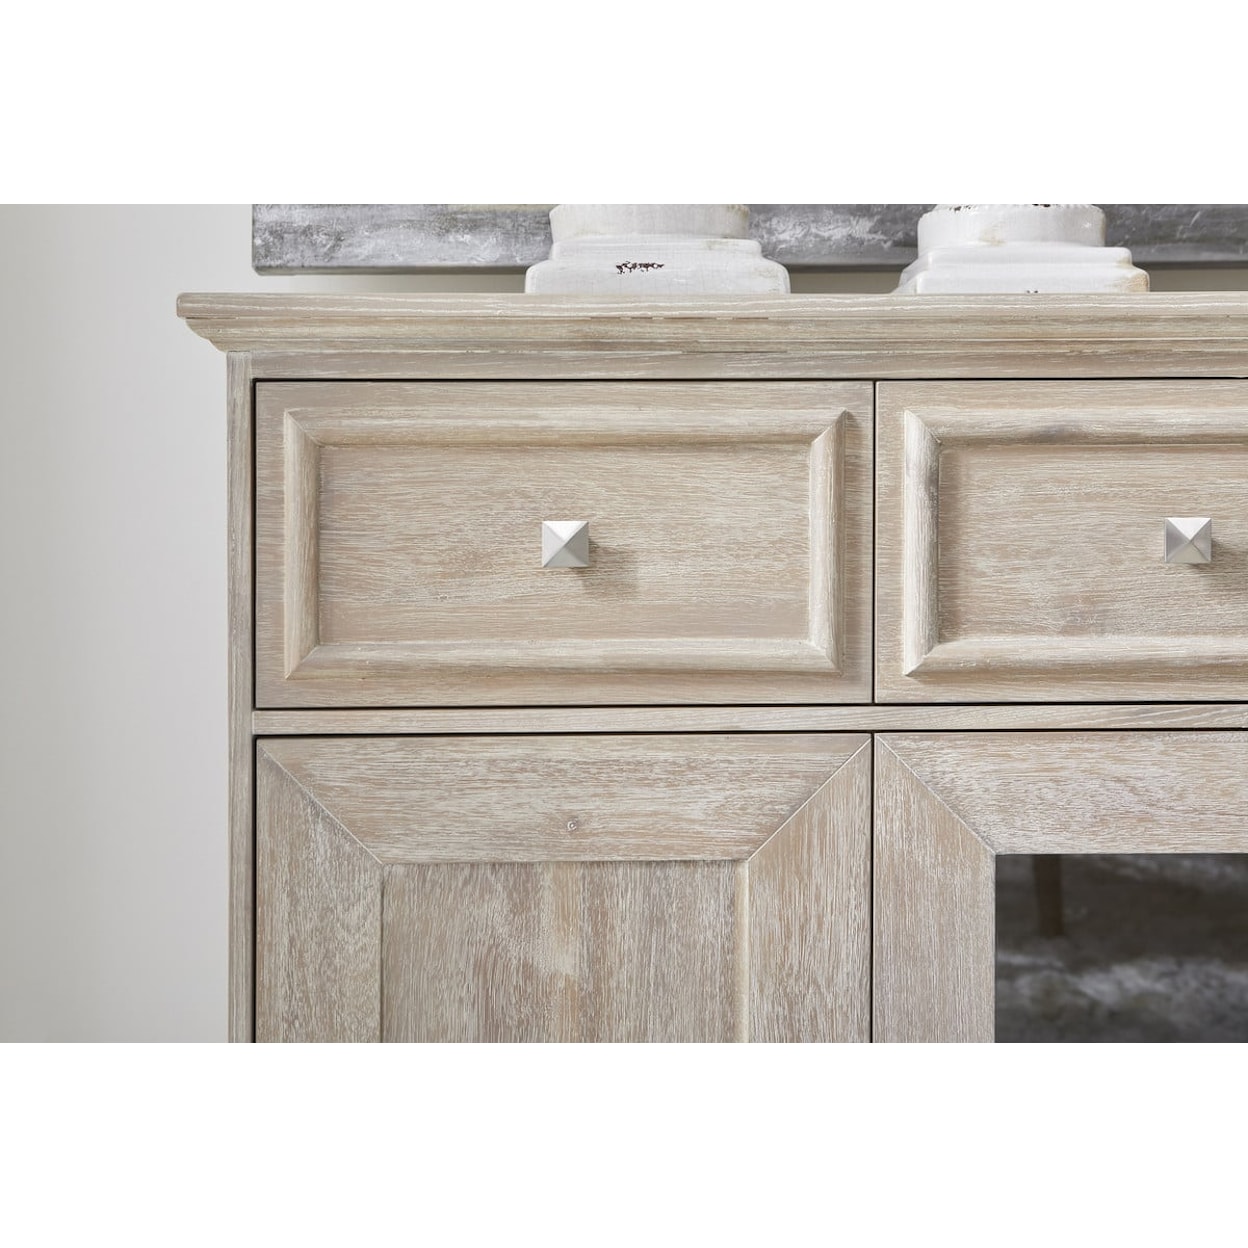 Essentials for Living Traditions Hudson Sideboard